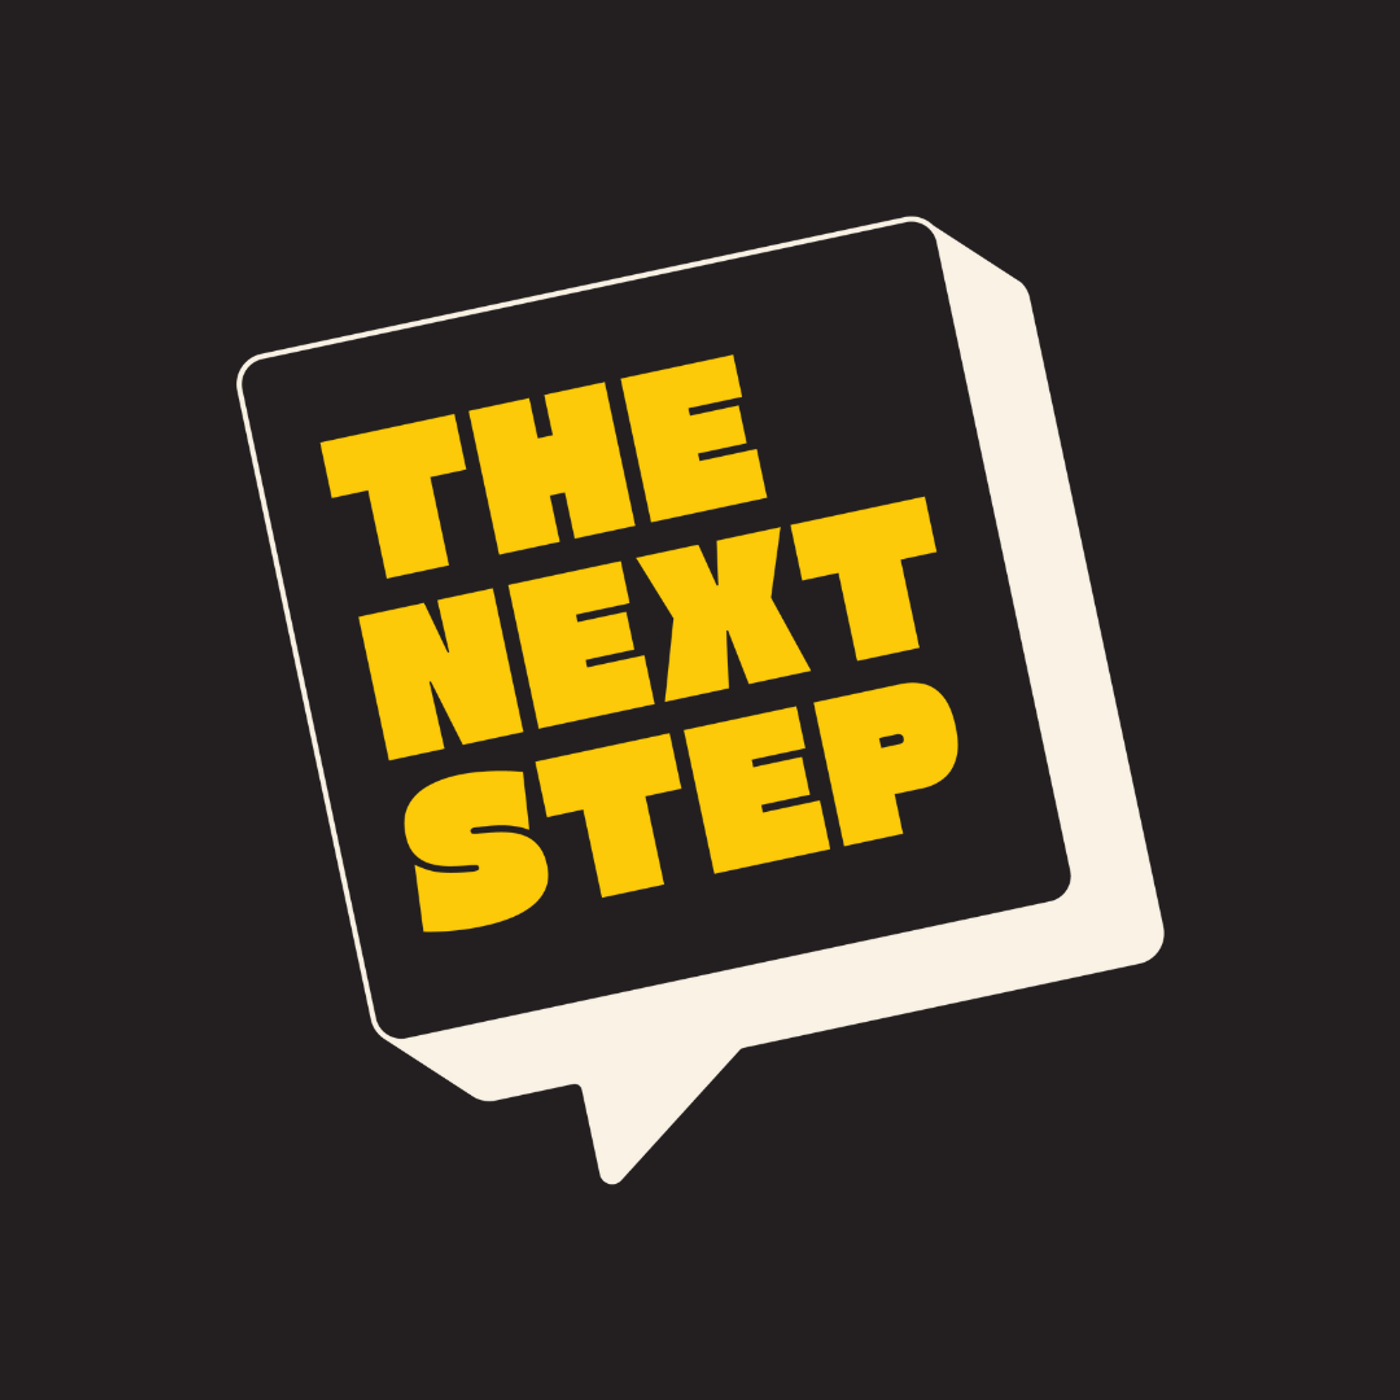 S6 Ep270: HOW TO GROW YOUR OWN BUSINESS (FROM SCRATCH) Interview: Luisa Zhou (The Next Step)